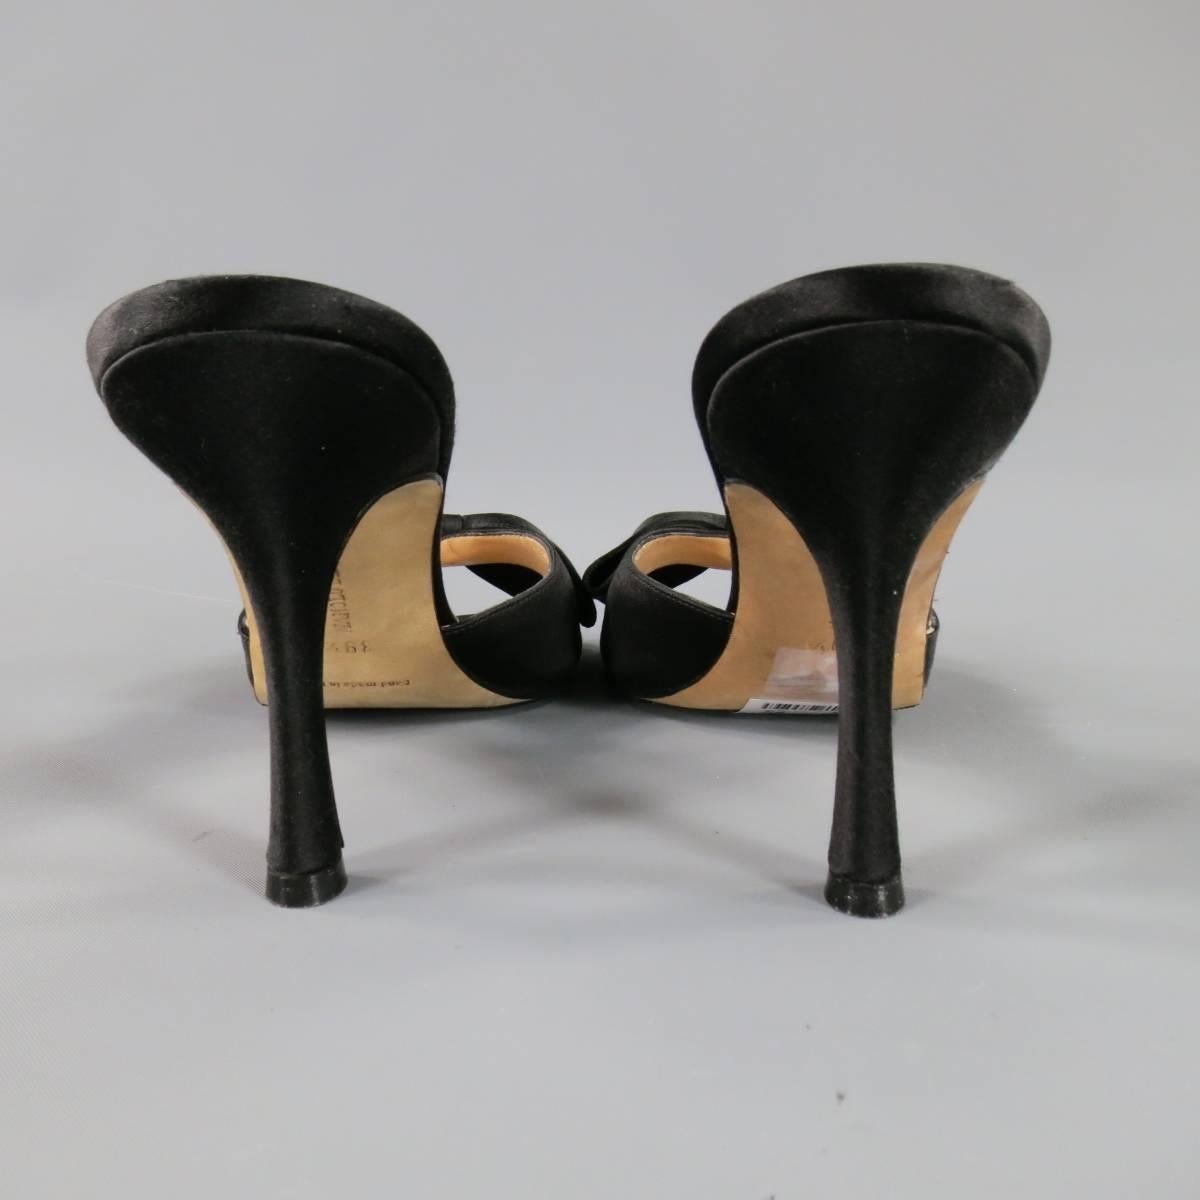 These gorgeous MANOLO BLAHNIK mules come in black silk satin and feature a peep toe strap with large bow detail and covered stiletto heel. Unworn with anti slip sole added. Made in Italy.
 
Excellent Pre-Owned Condition.
Marked: 39 1/2
